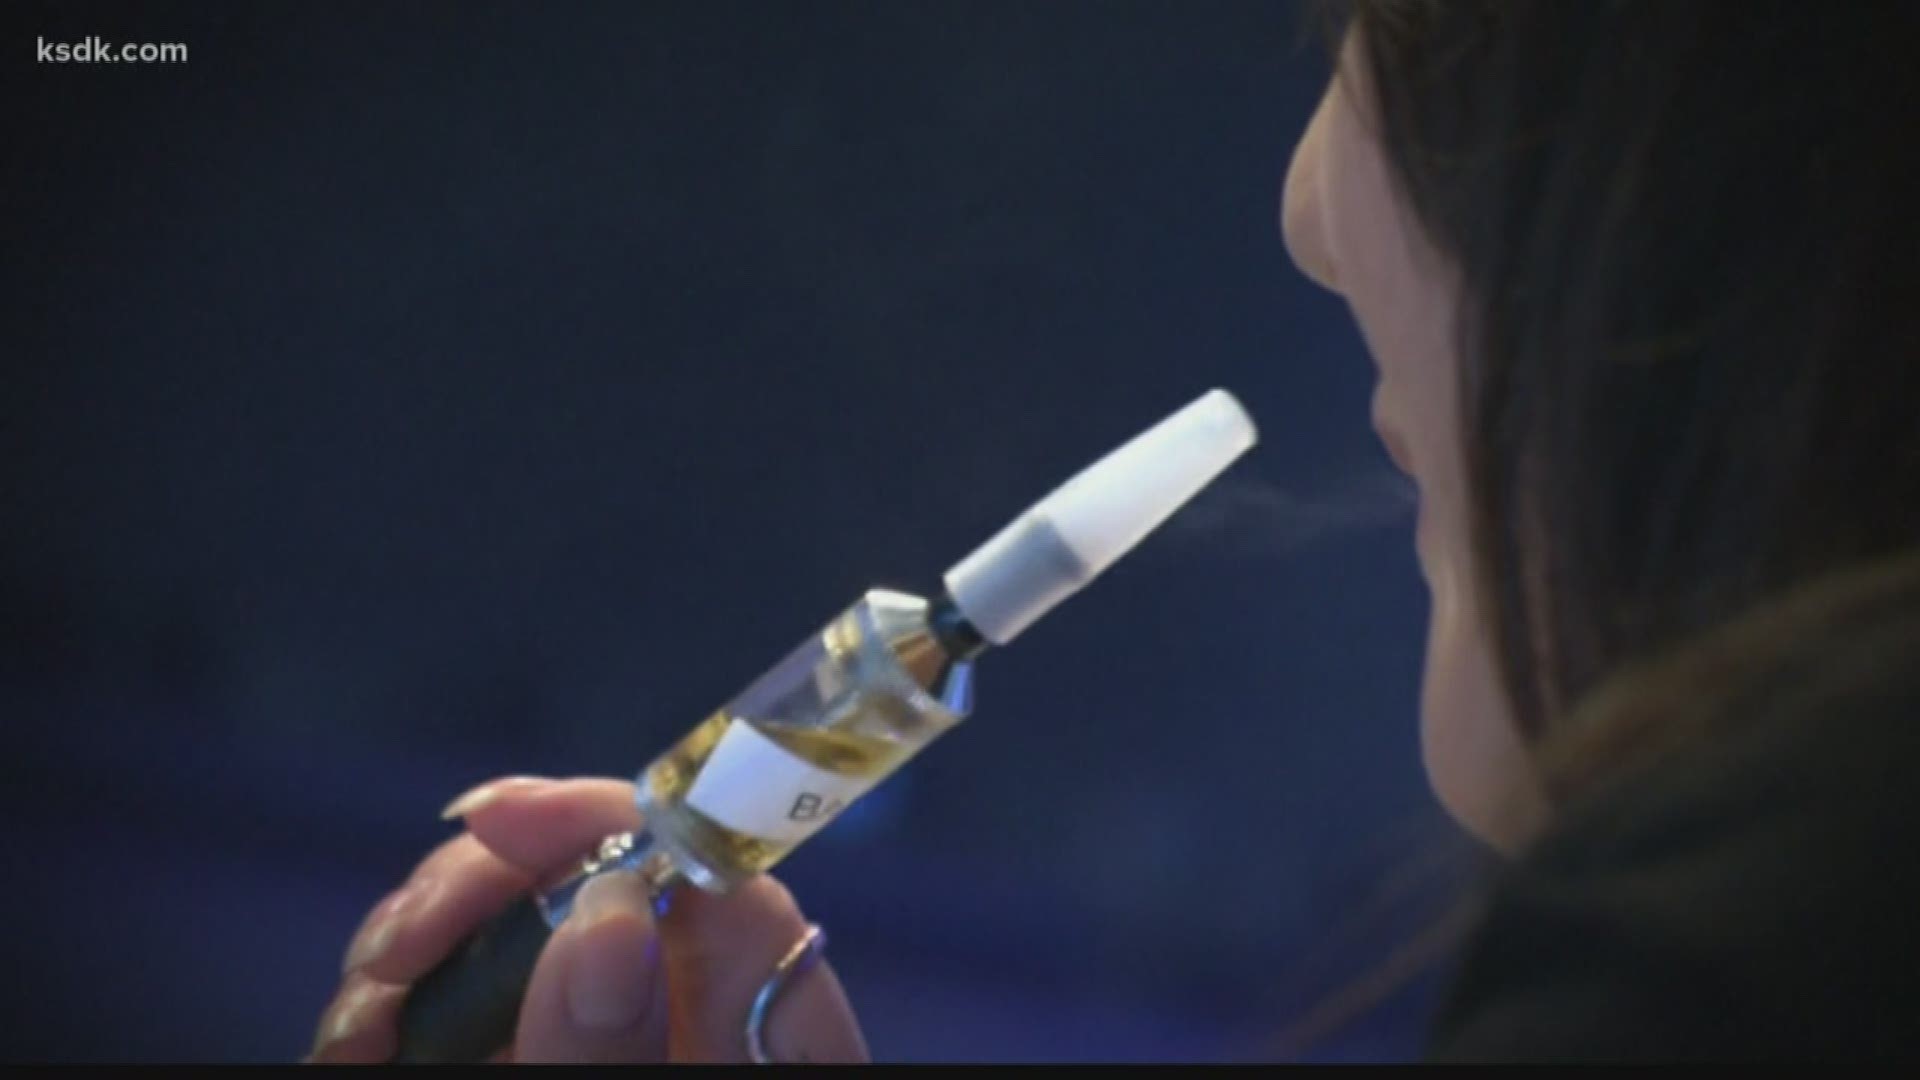 Recent data said more than 25% of teens have tried vaping